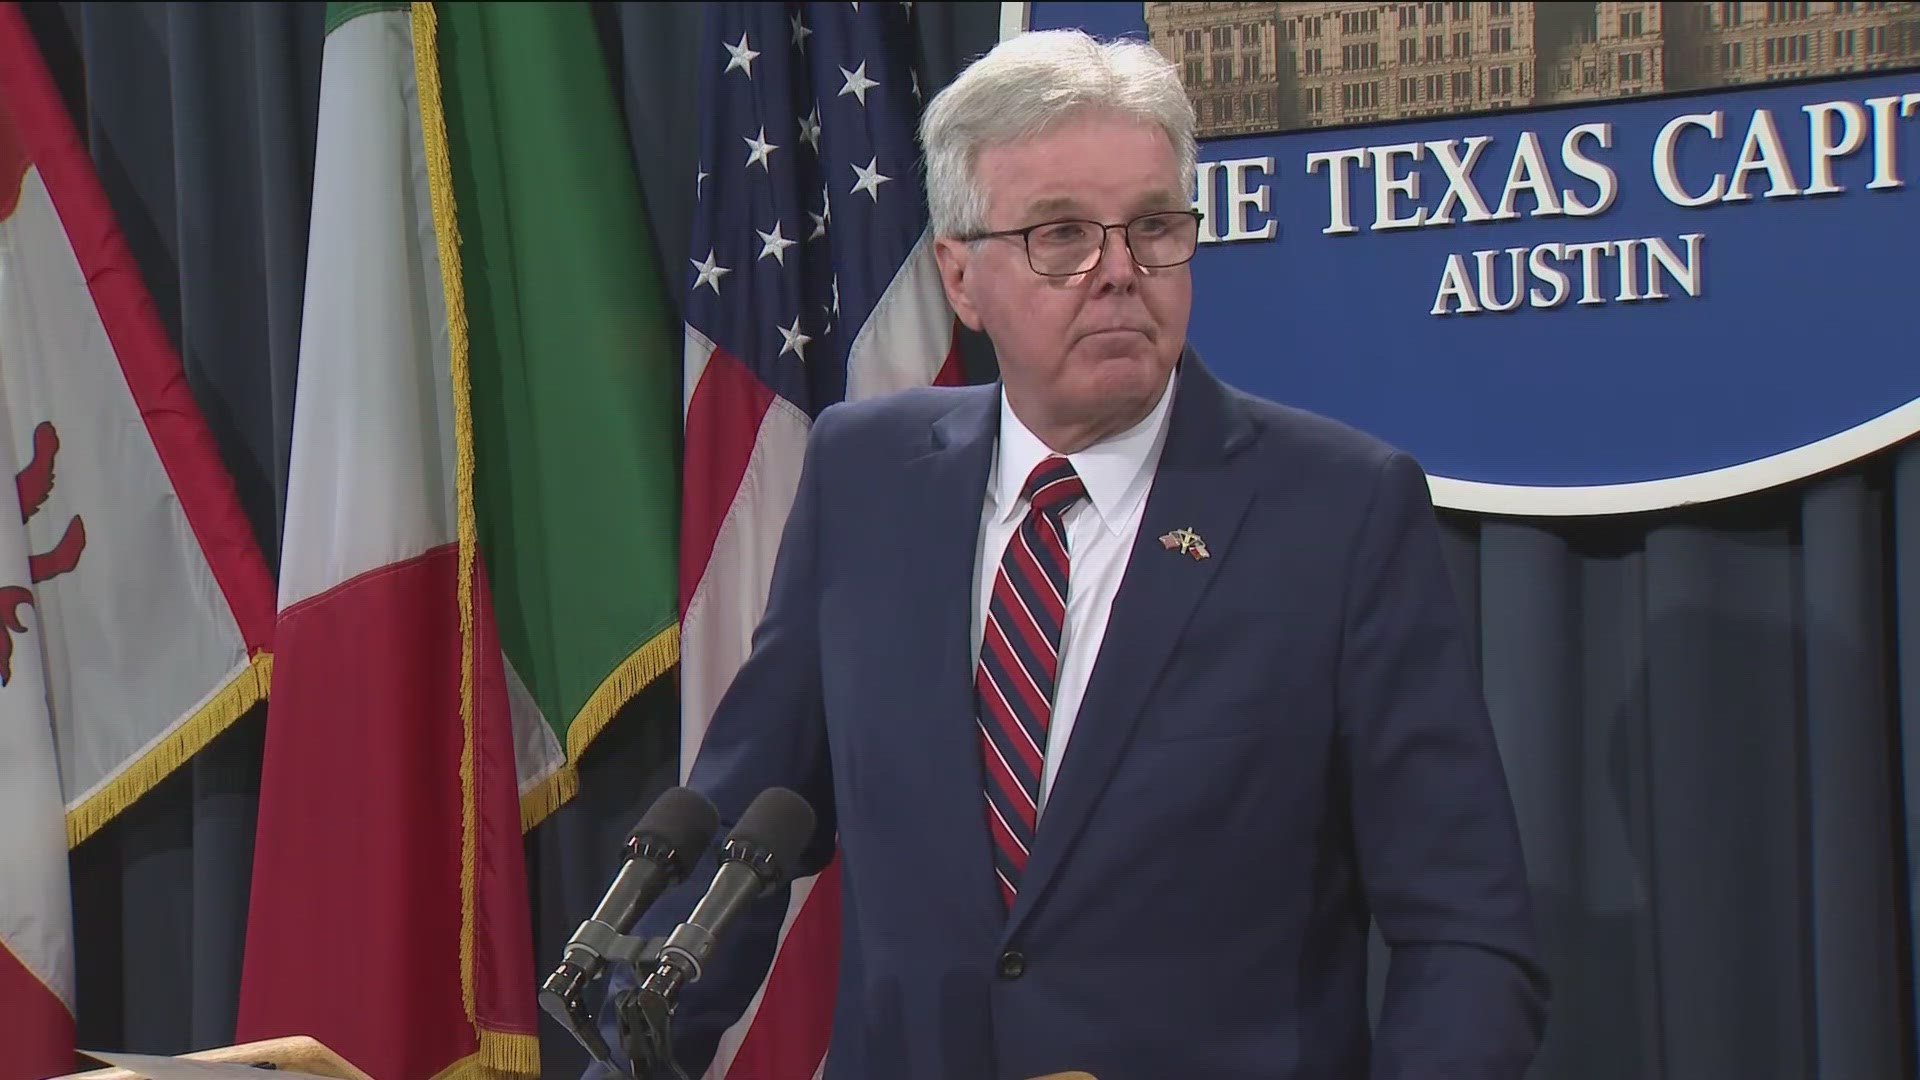 Texas Lt. Gov. Dan Patrick told reporters the Senate is not backing down from its property tax relief plan. The Texas Legislature budgeted $17.6 billion for relief.